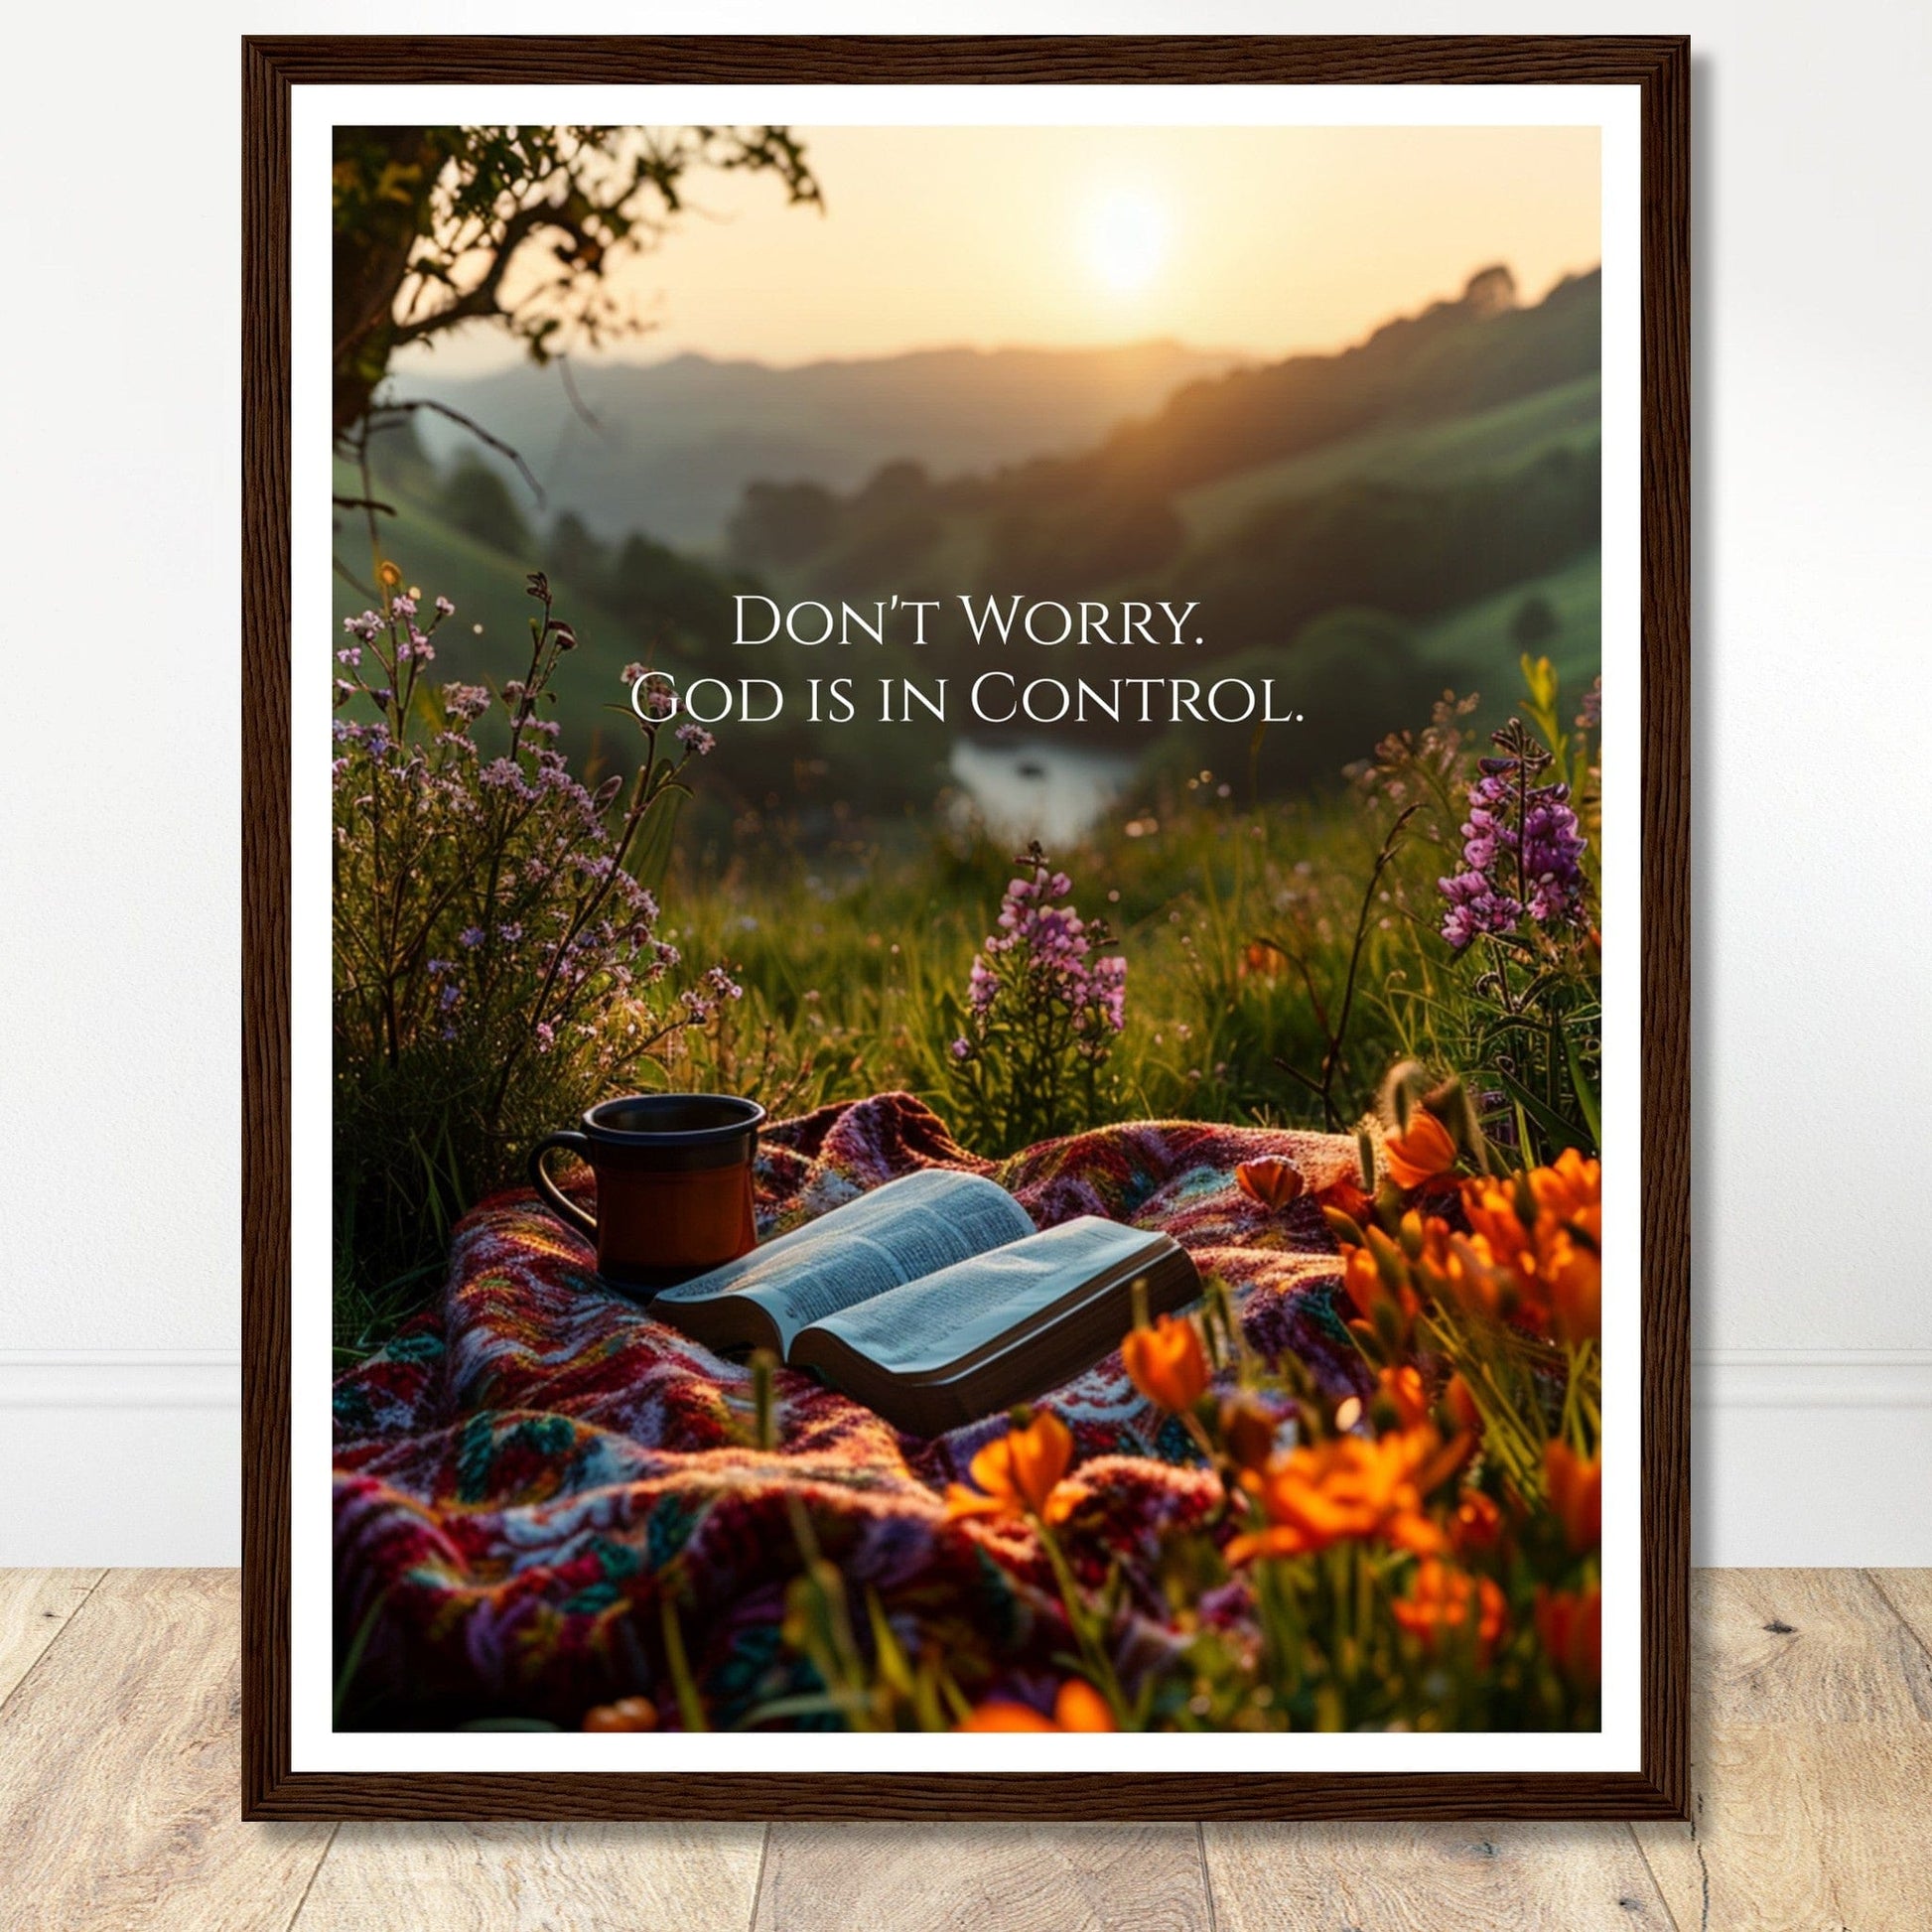 Coffee With My Father Print Material 40x50 cm / 16x20″ / Dark wood frame Premium Matte Paper Wooden Framed Poster